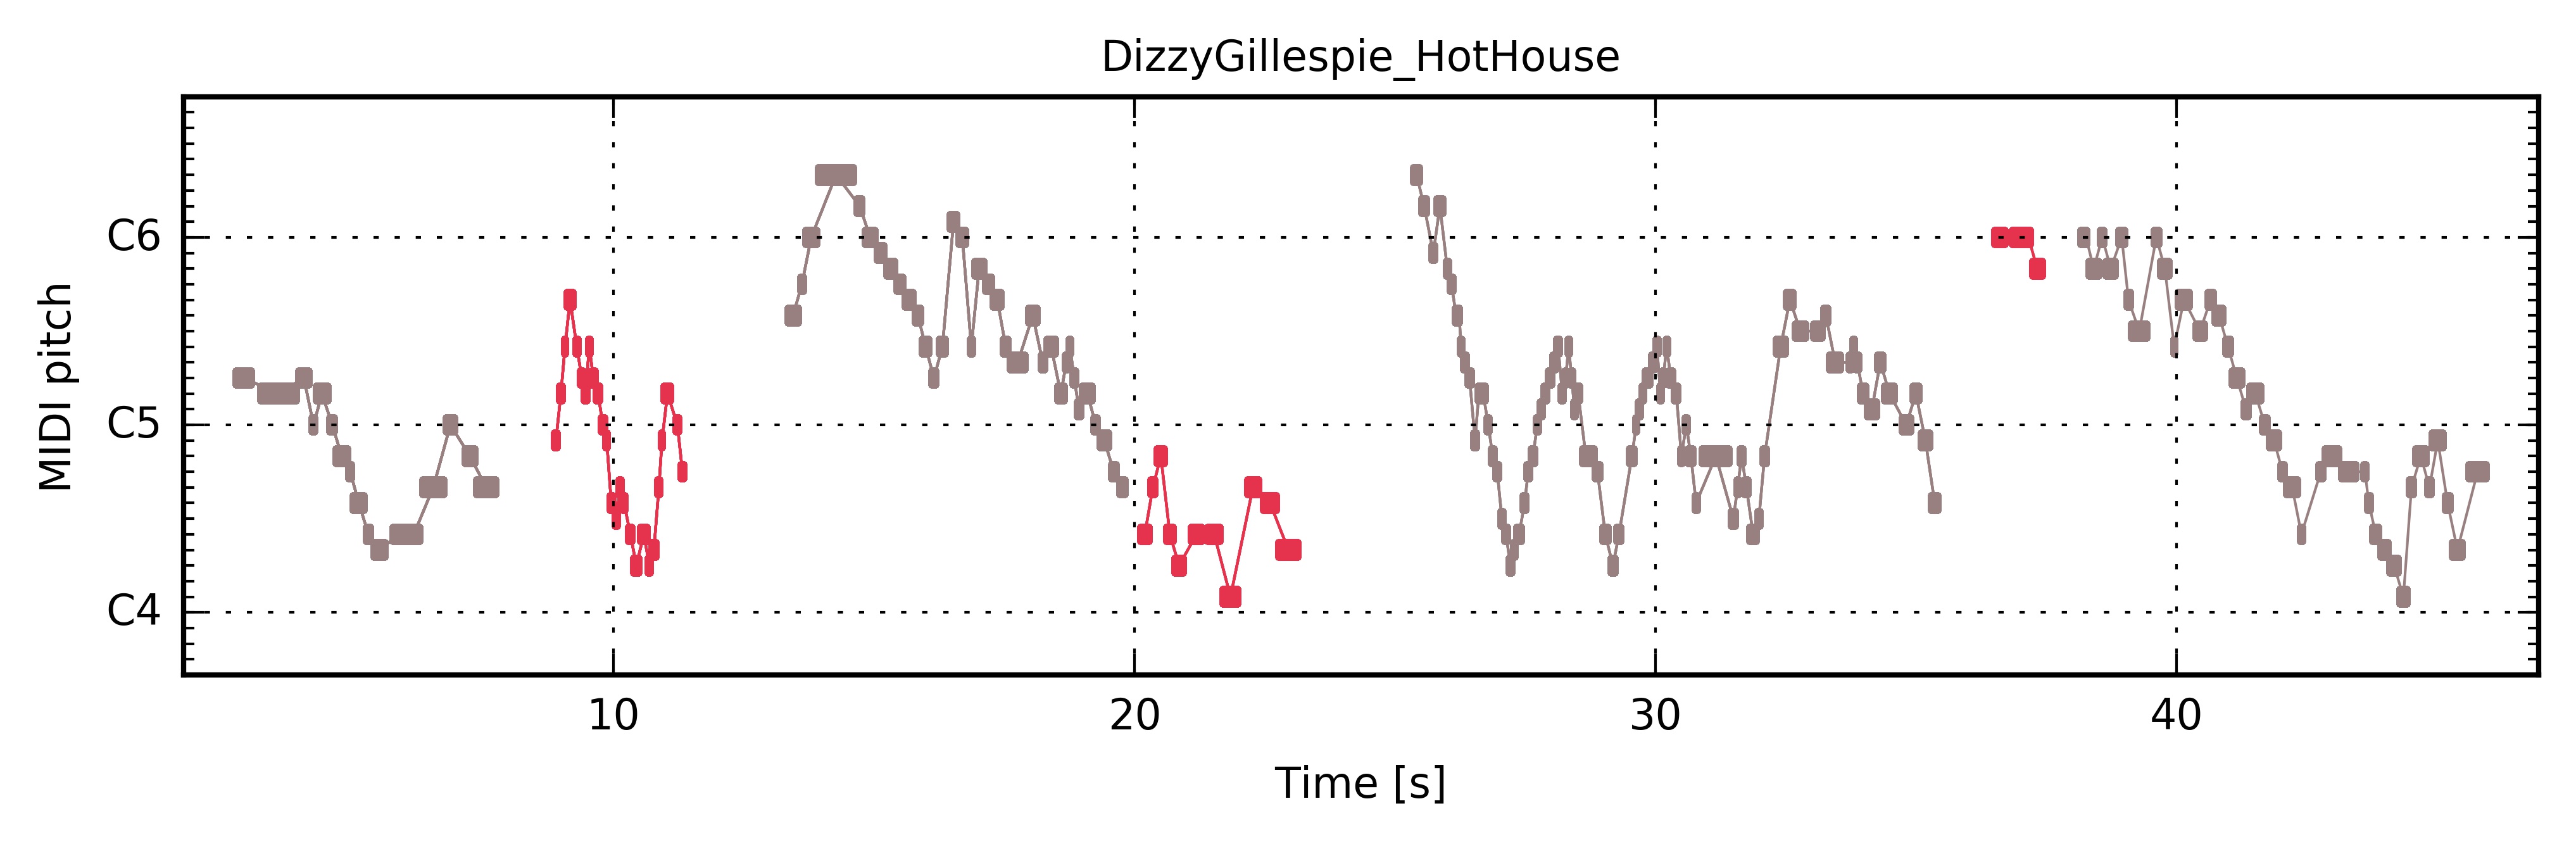 ../../_images/PianoRoll_DizzyGillespie_HotHouse.jpg